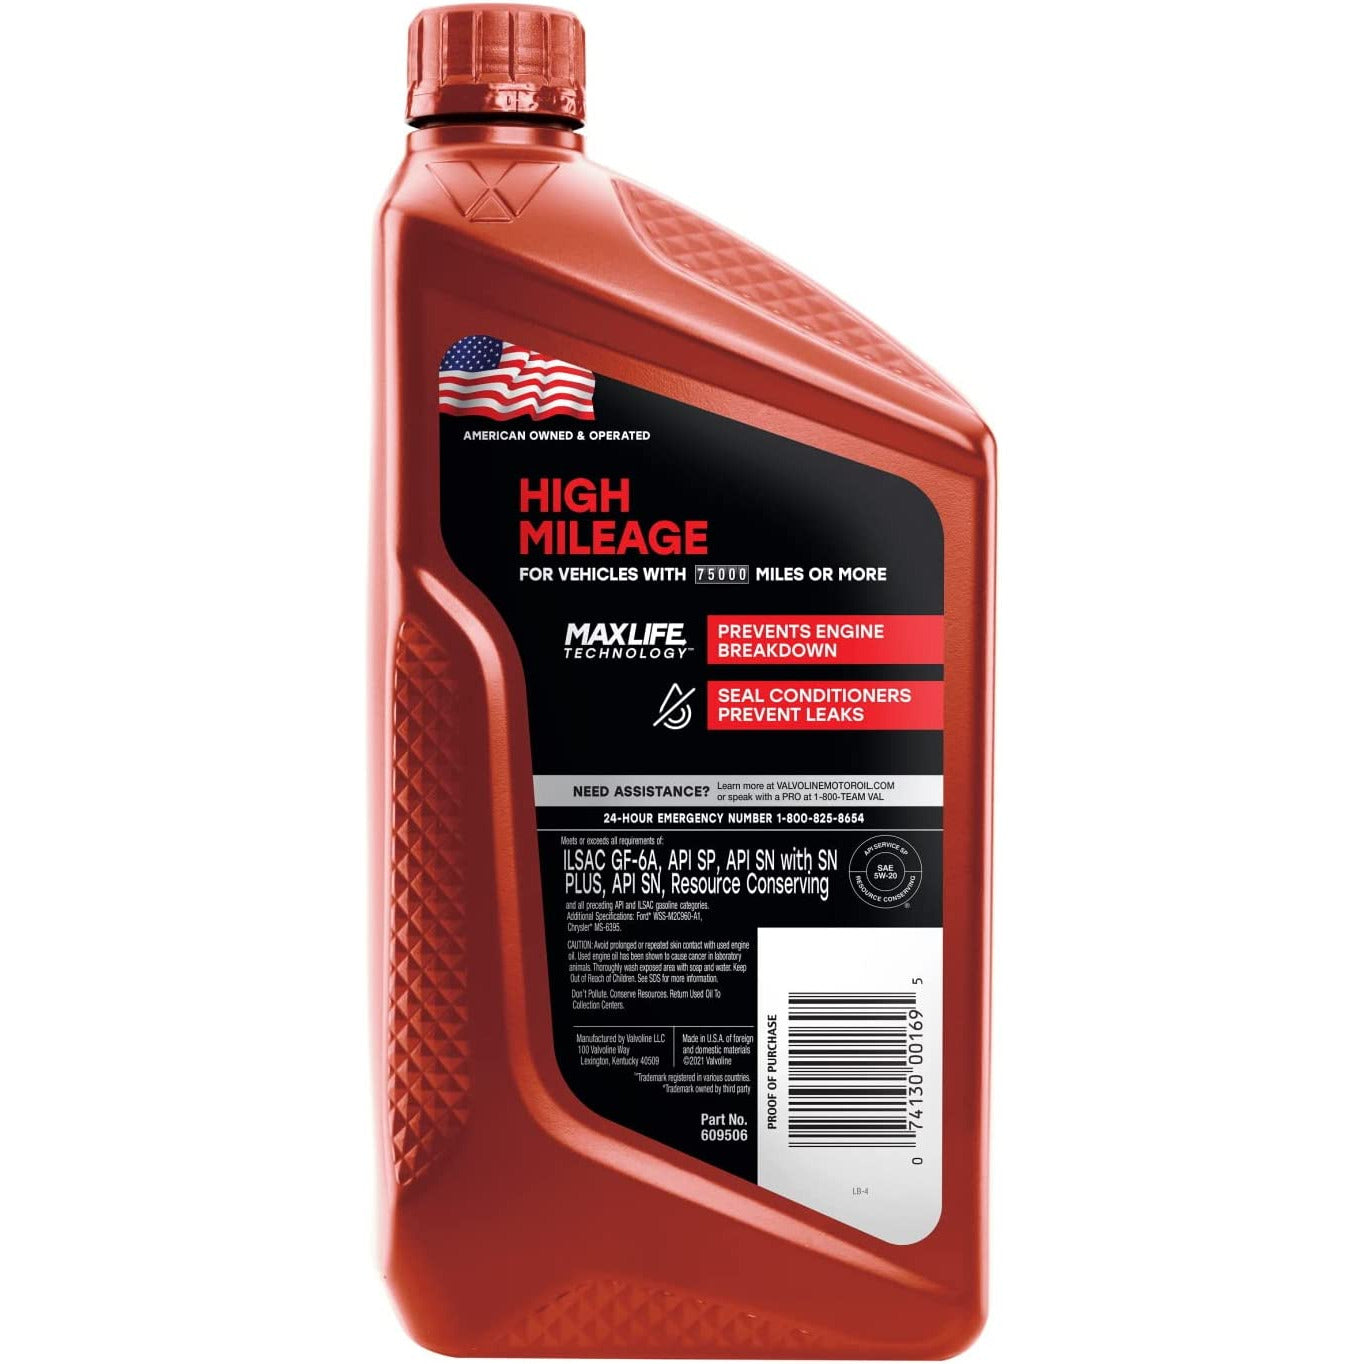 VAL VV169 | High Mileage MaxLife Technology Synthetic Blend 5W-20 Motor Oil  : 1 QT